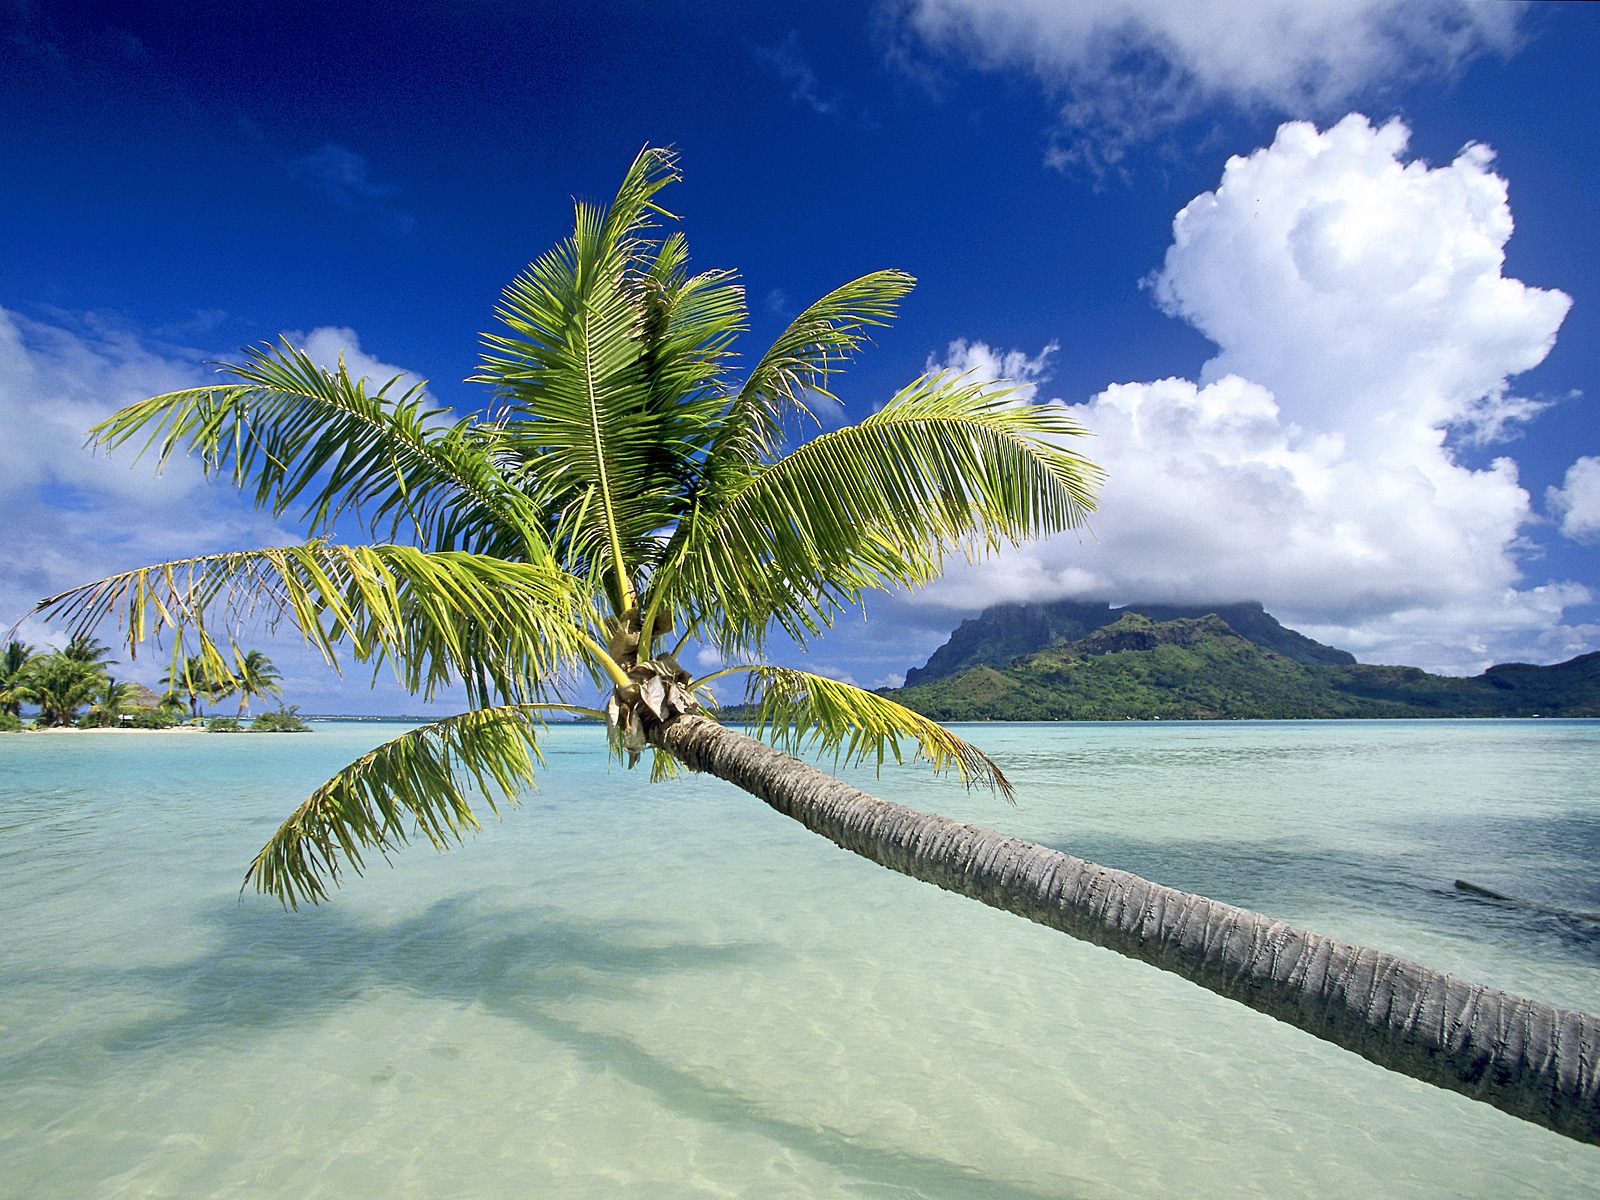 Free download download 1600x1200 tropical island beach scenery green